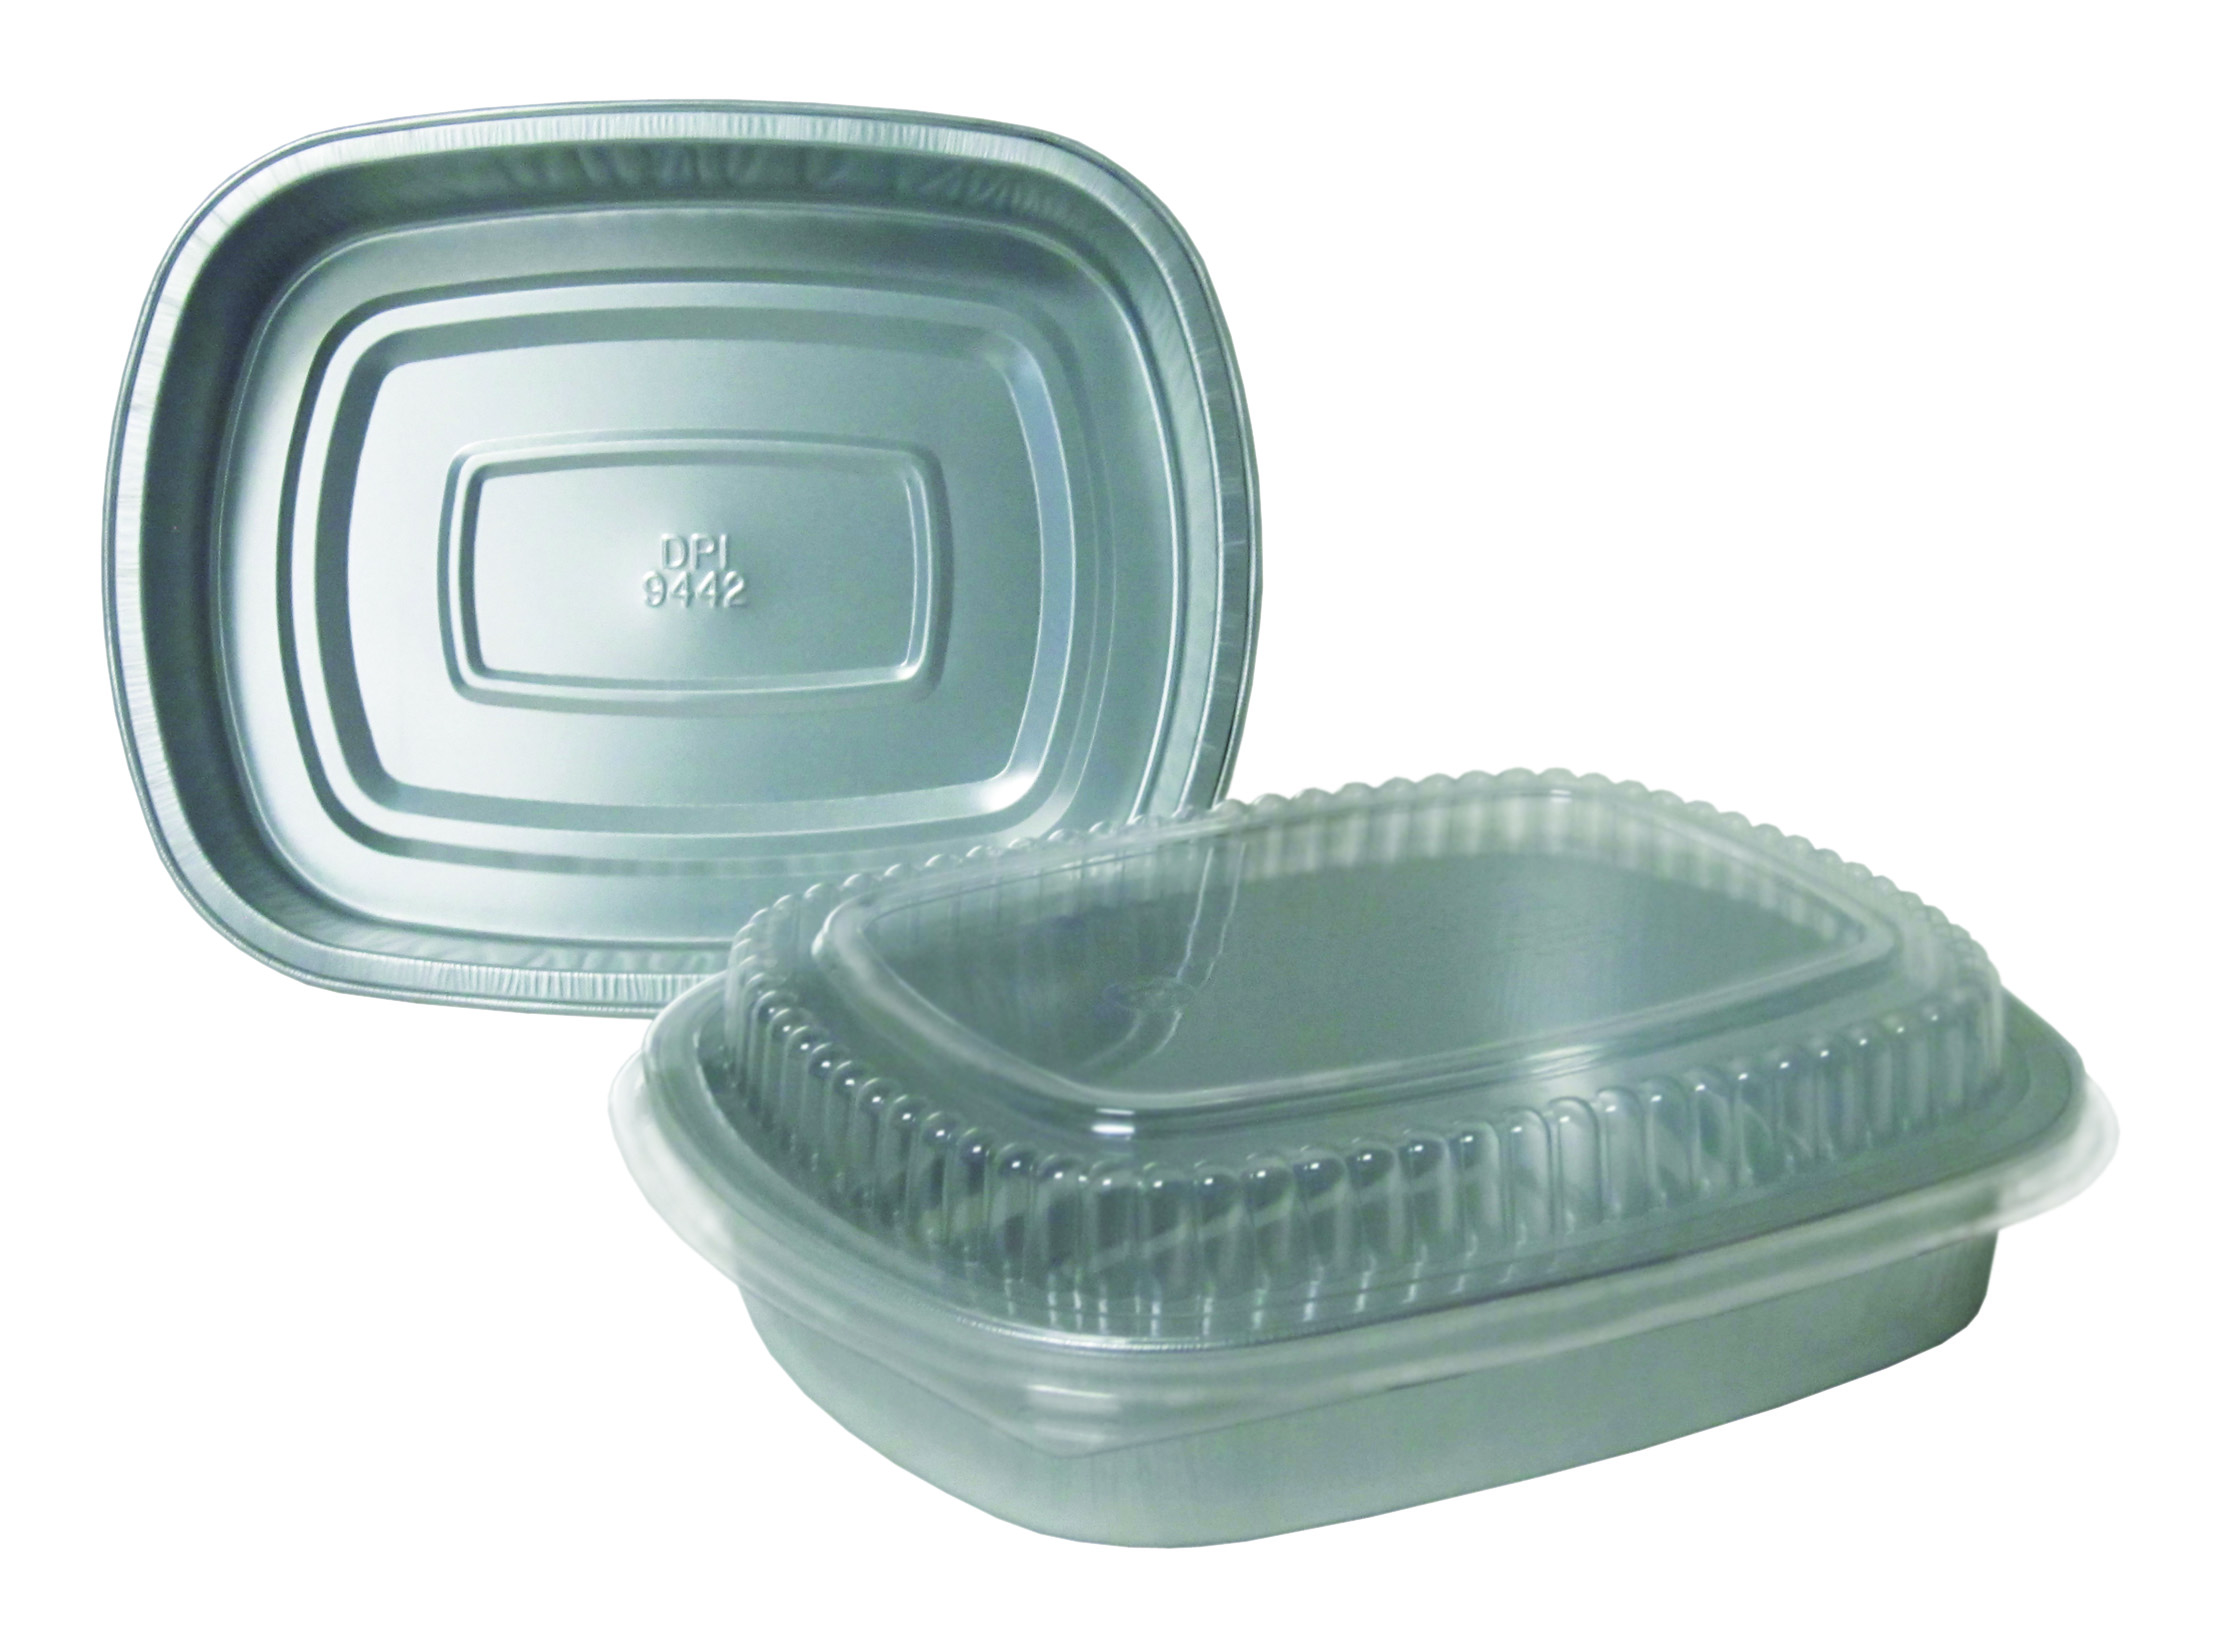 http://www.durablepackaging.com/images/products/091539_9442SL50.jpg